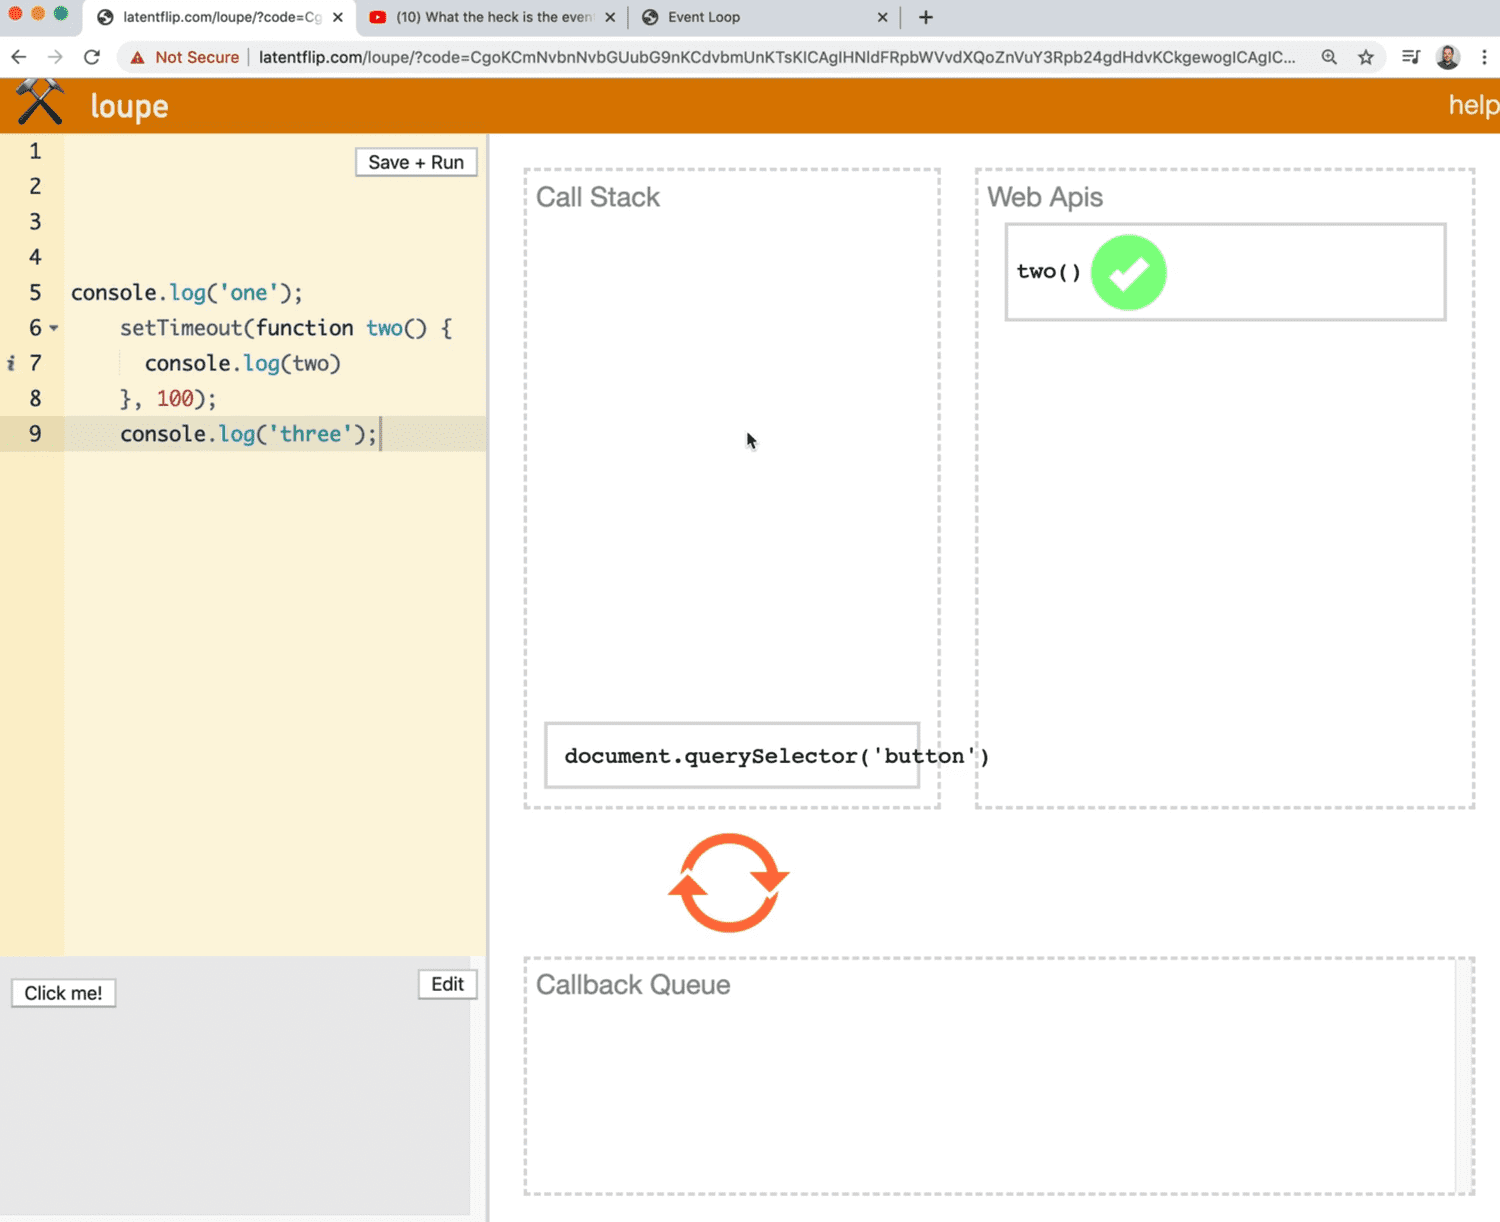 a tool loupe which will help us visualize the callstack